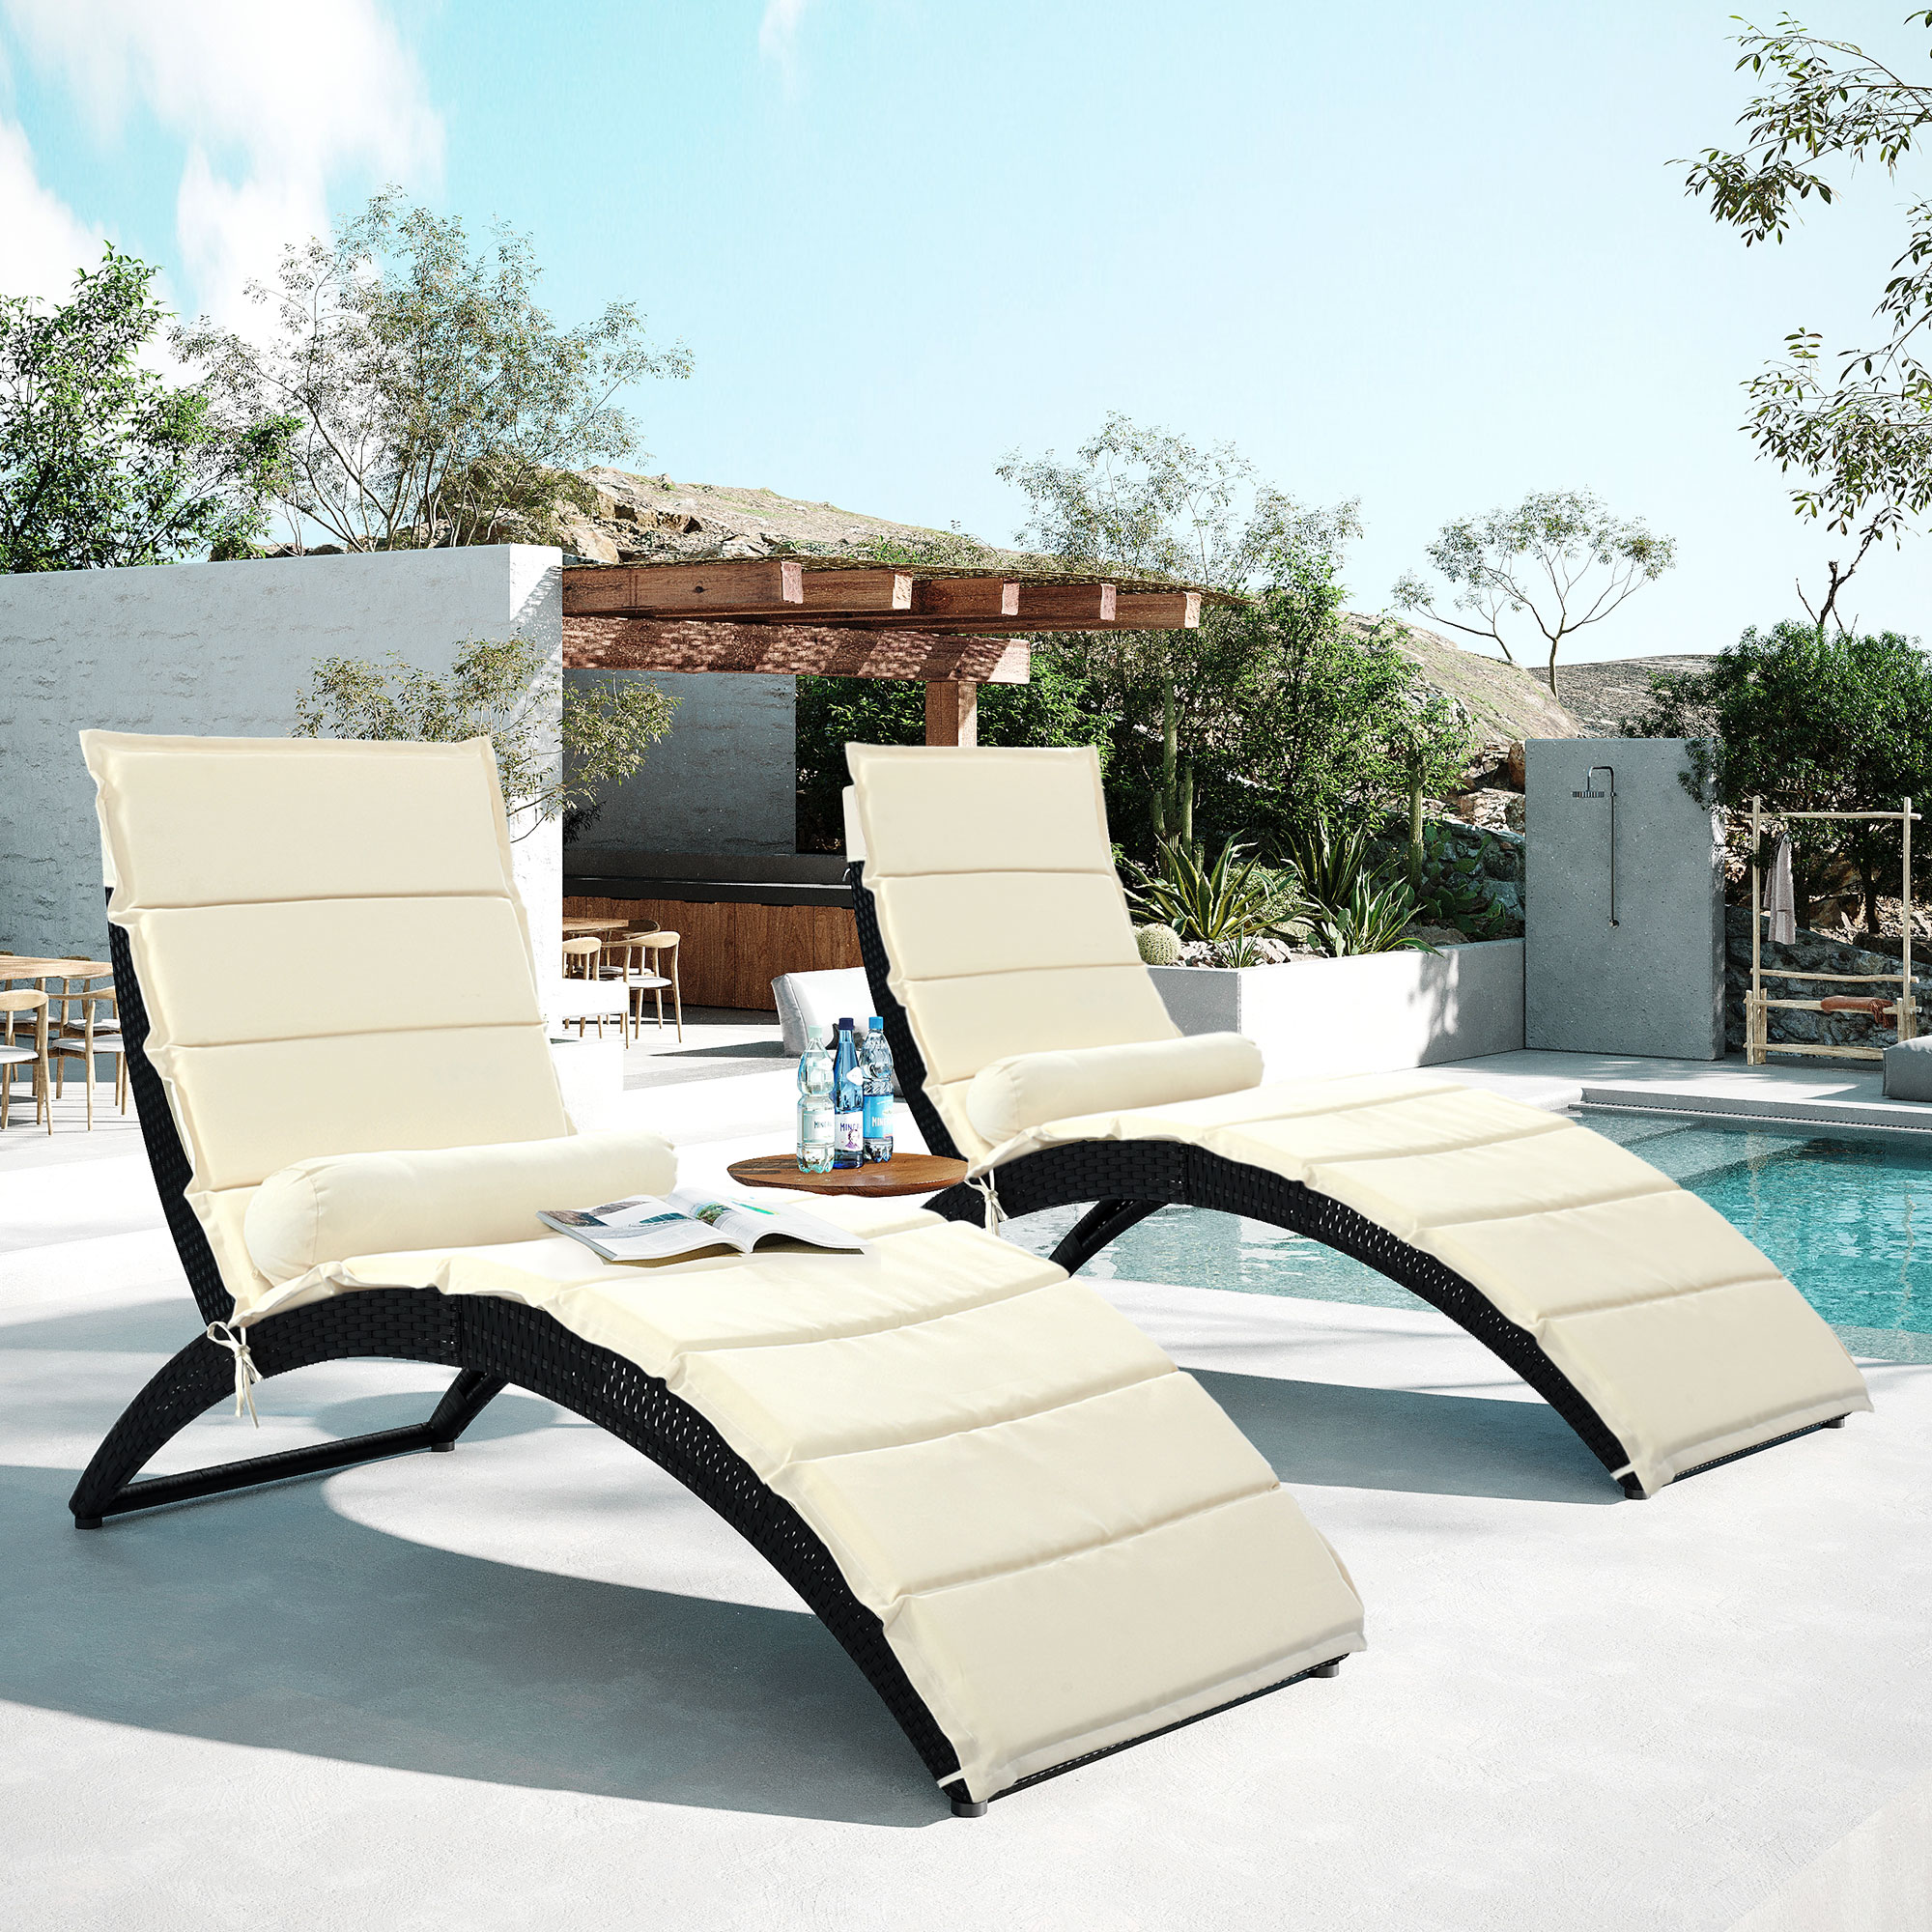 Outdoor Chaise Lounge Set of 2, PE Wicker Lounge Chairs for Outside, Adjustable Chaise Lounges with Removable Cushions, Outdoor Rattan Sunbed for Poolside, Patio, Backyard, Garden, Beige, D6380 - image 1 of 10